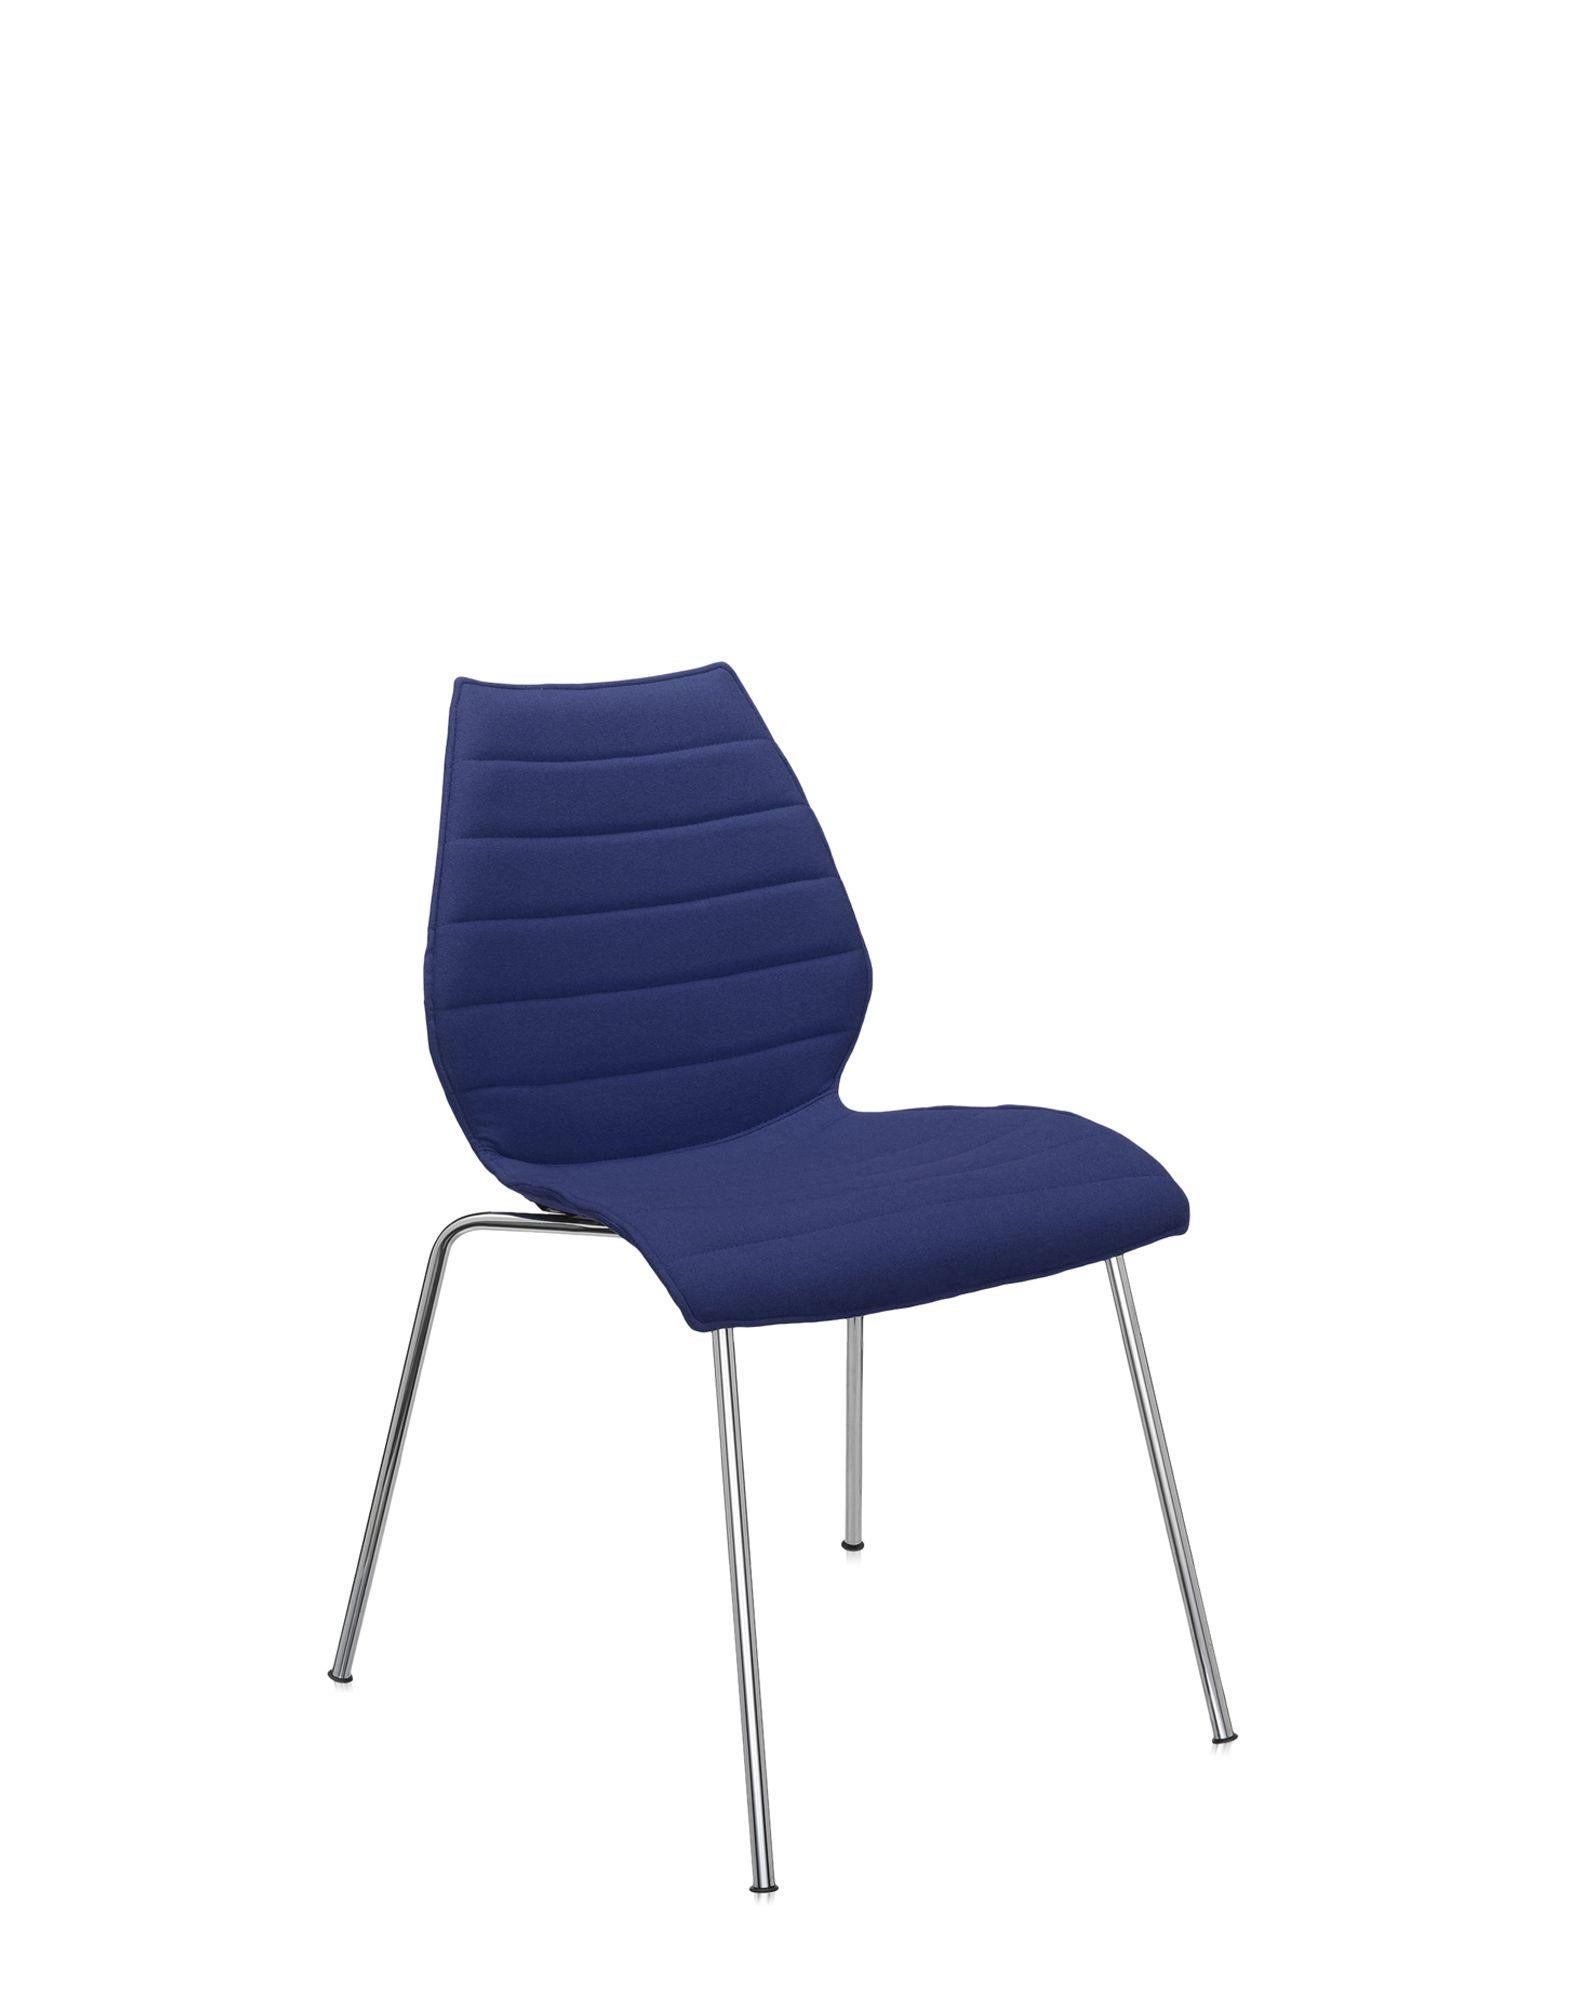 The Maui chairs form a family with a rich variety of colours and shapes, both hard and soft, capable of satisfying specific needs, at home or in professional environments. Thanks to its design, the Maui chair is stackable and can be joined endlessly